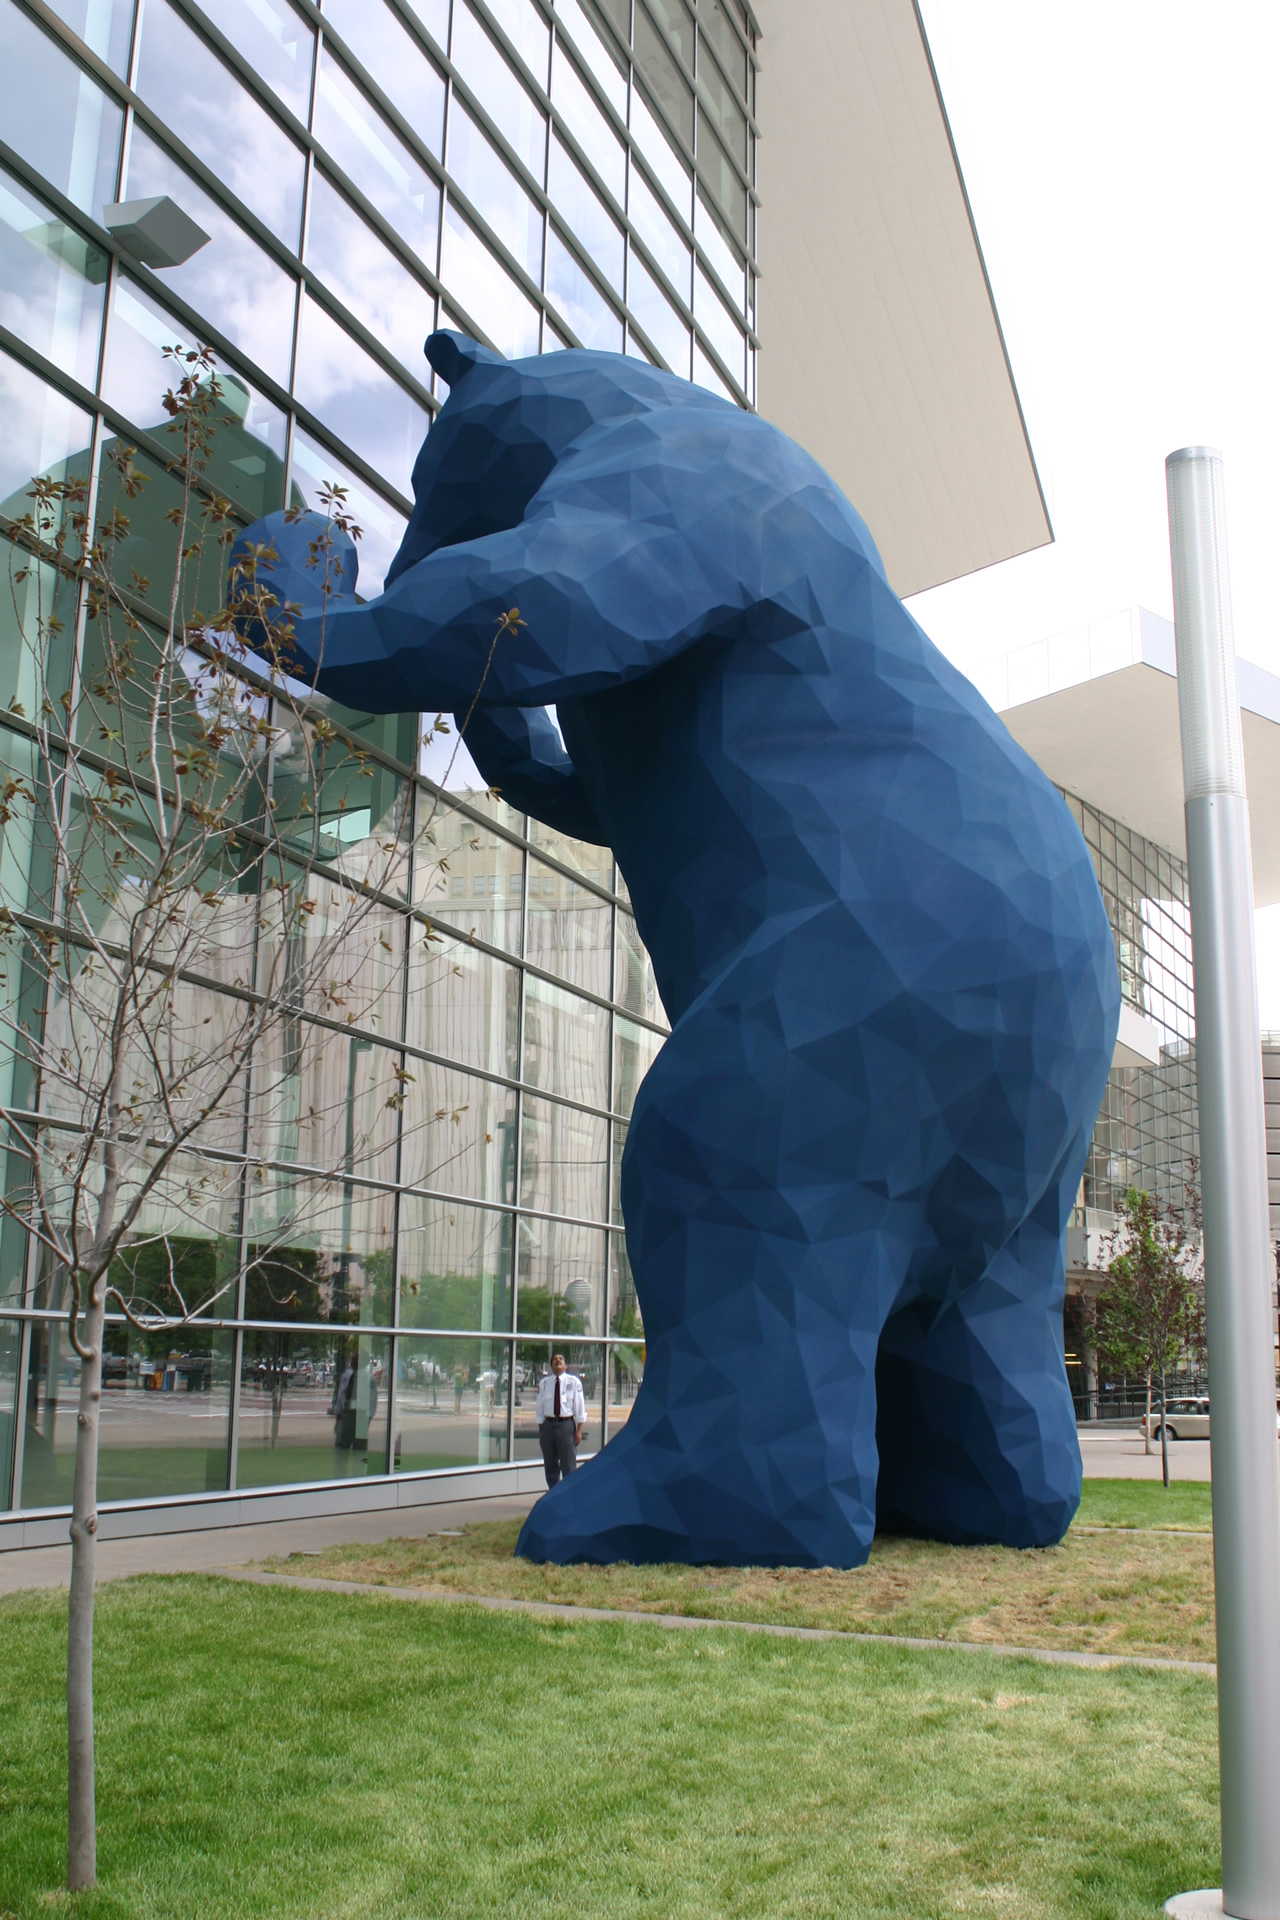 photograph of a sculpture that is a big blue bear that appears to be peering into a glass building